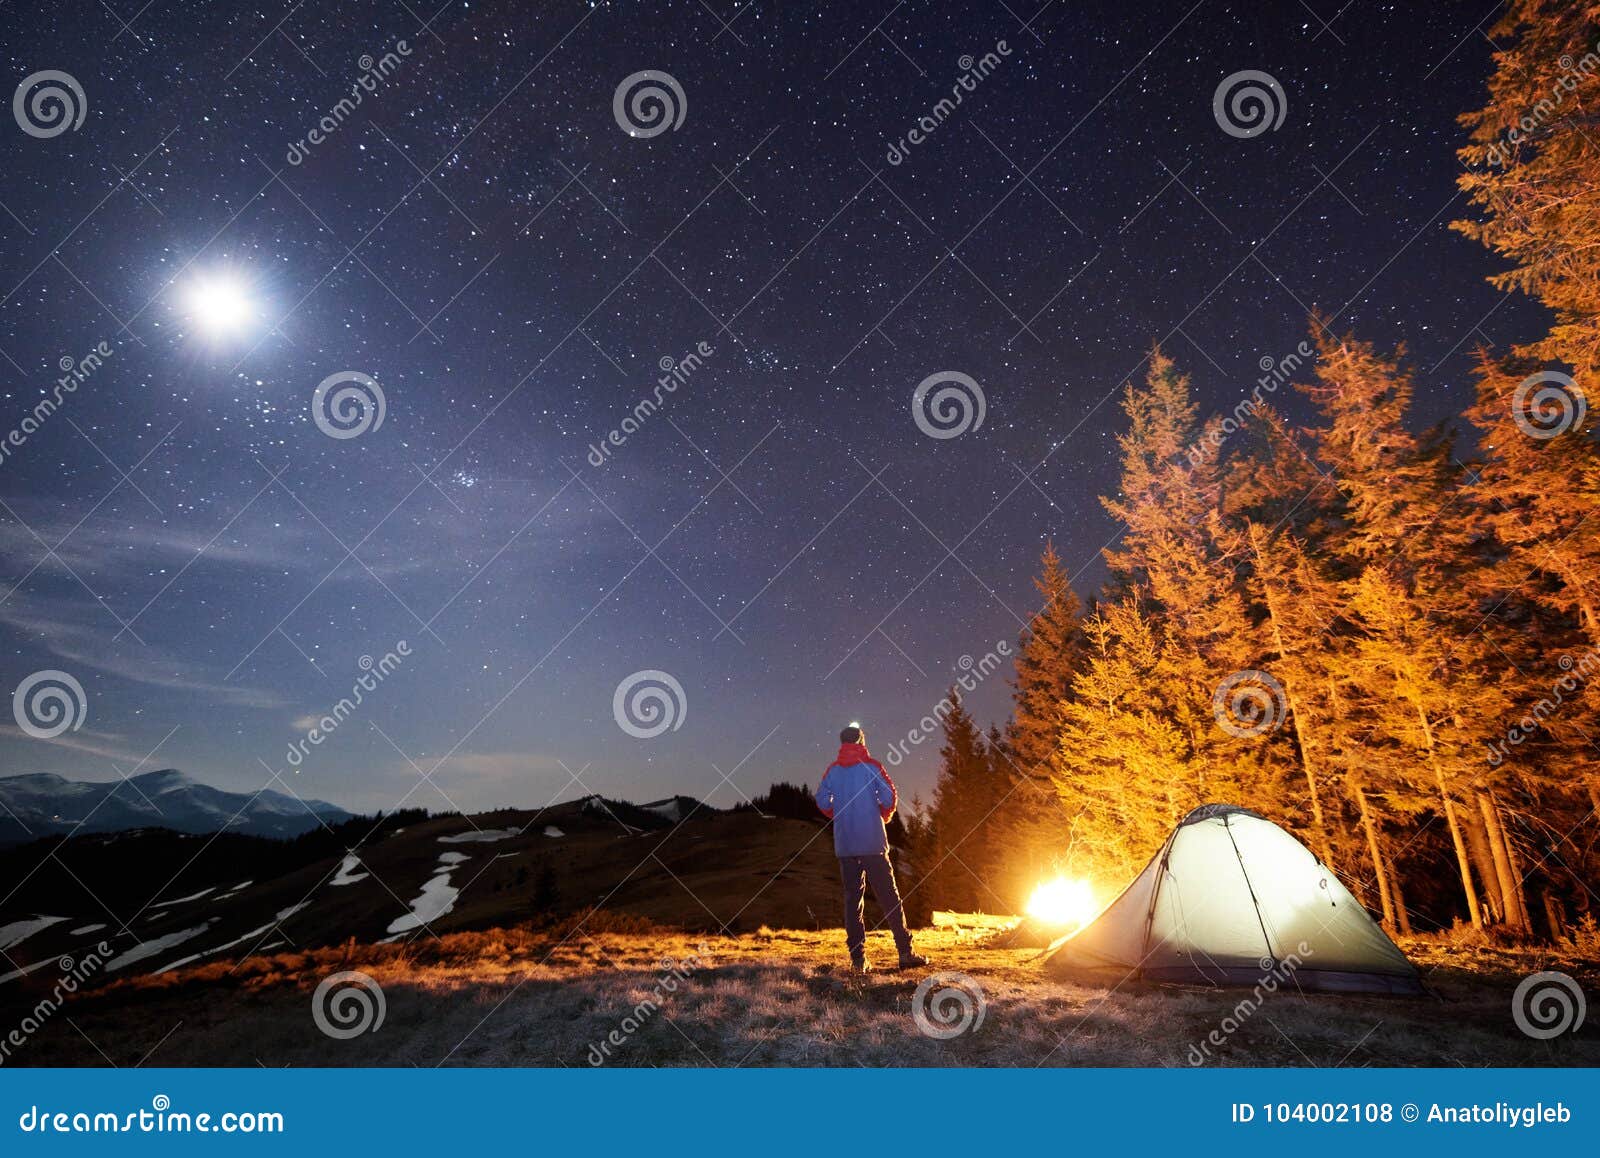 male hiker have a rest in his camp near the forest at night under beautiful night sky full of stars and the moon